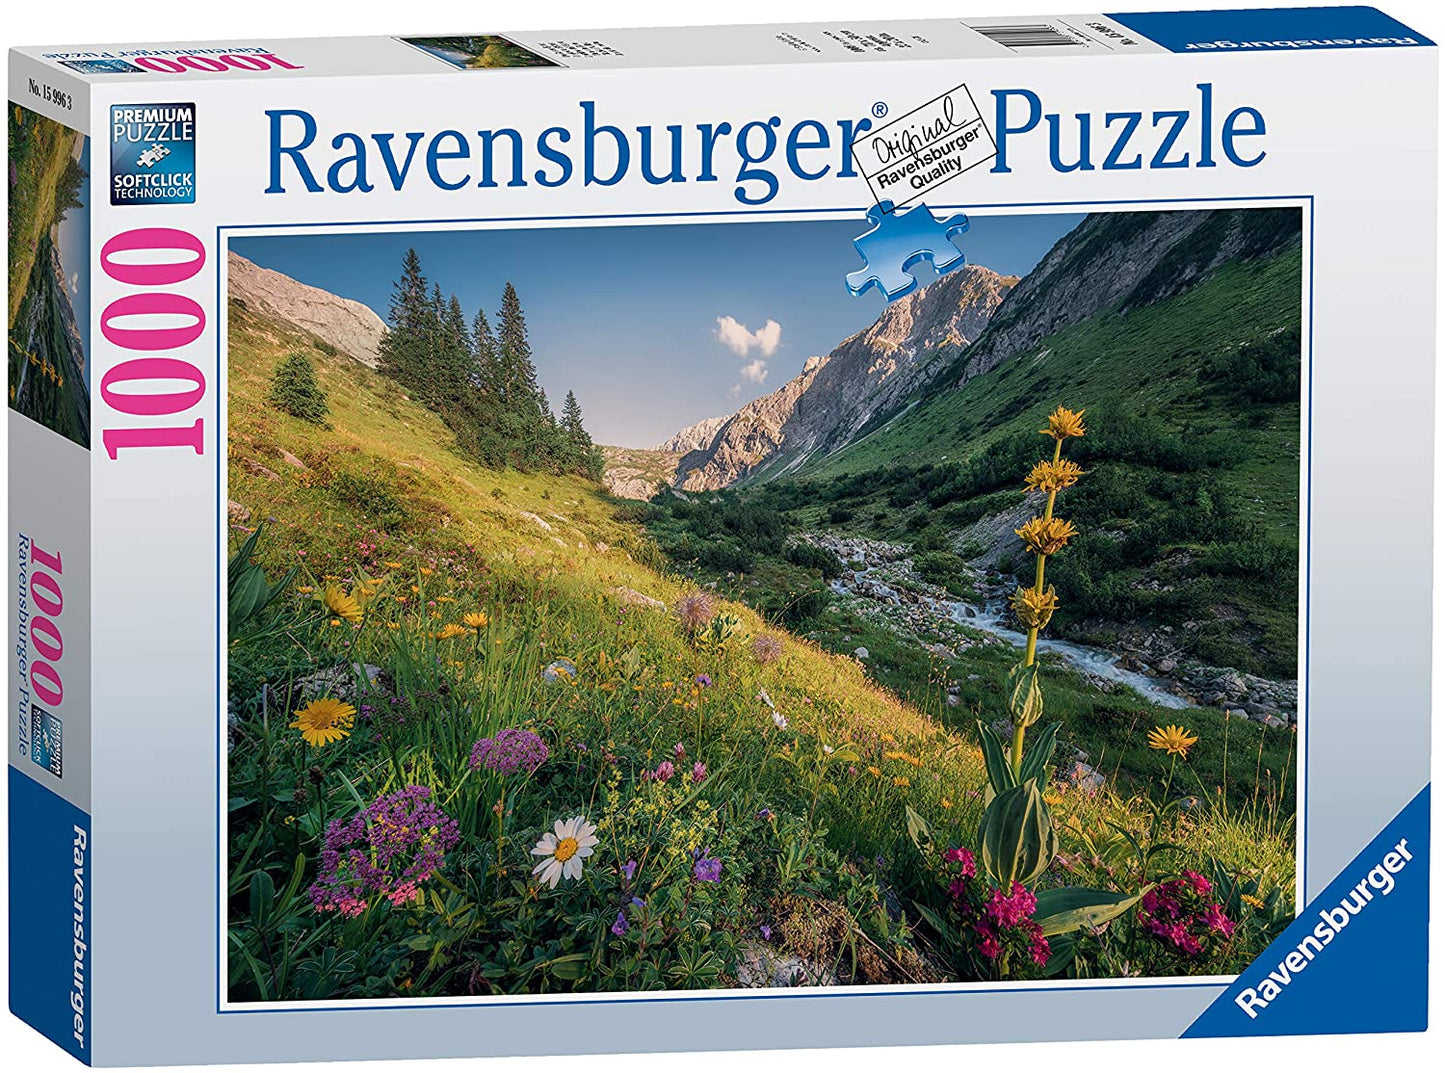 Ravensburger - Magical Valley - 1000 Piece Jigsaw Puzzle